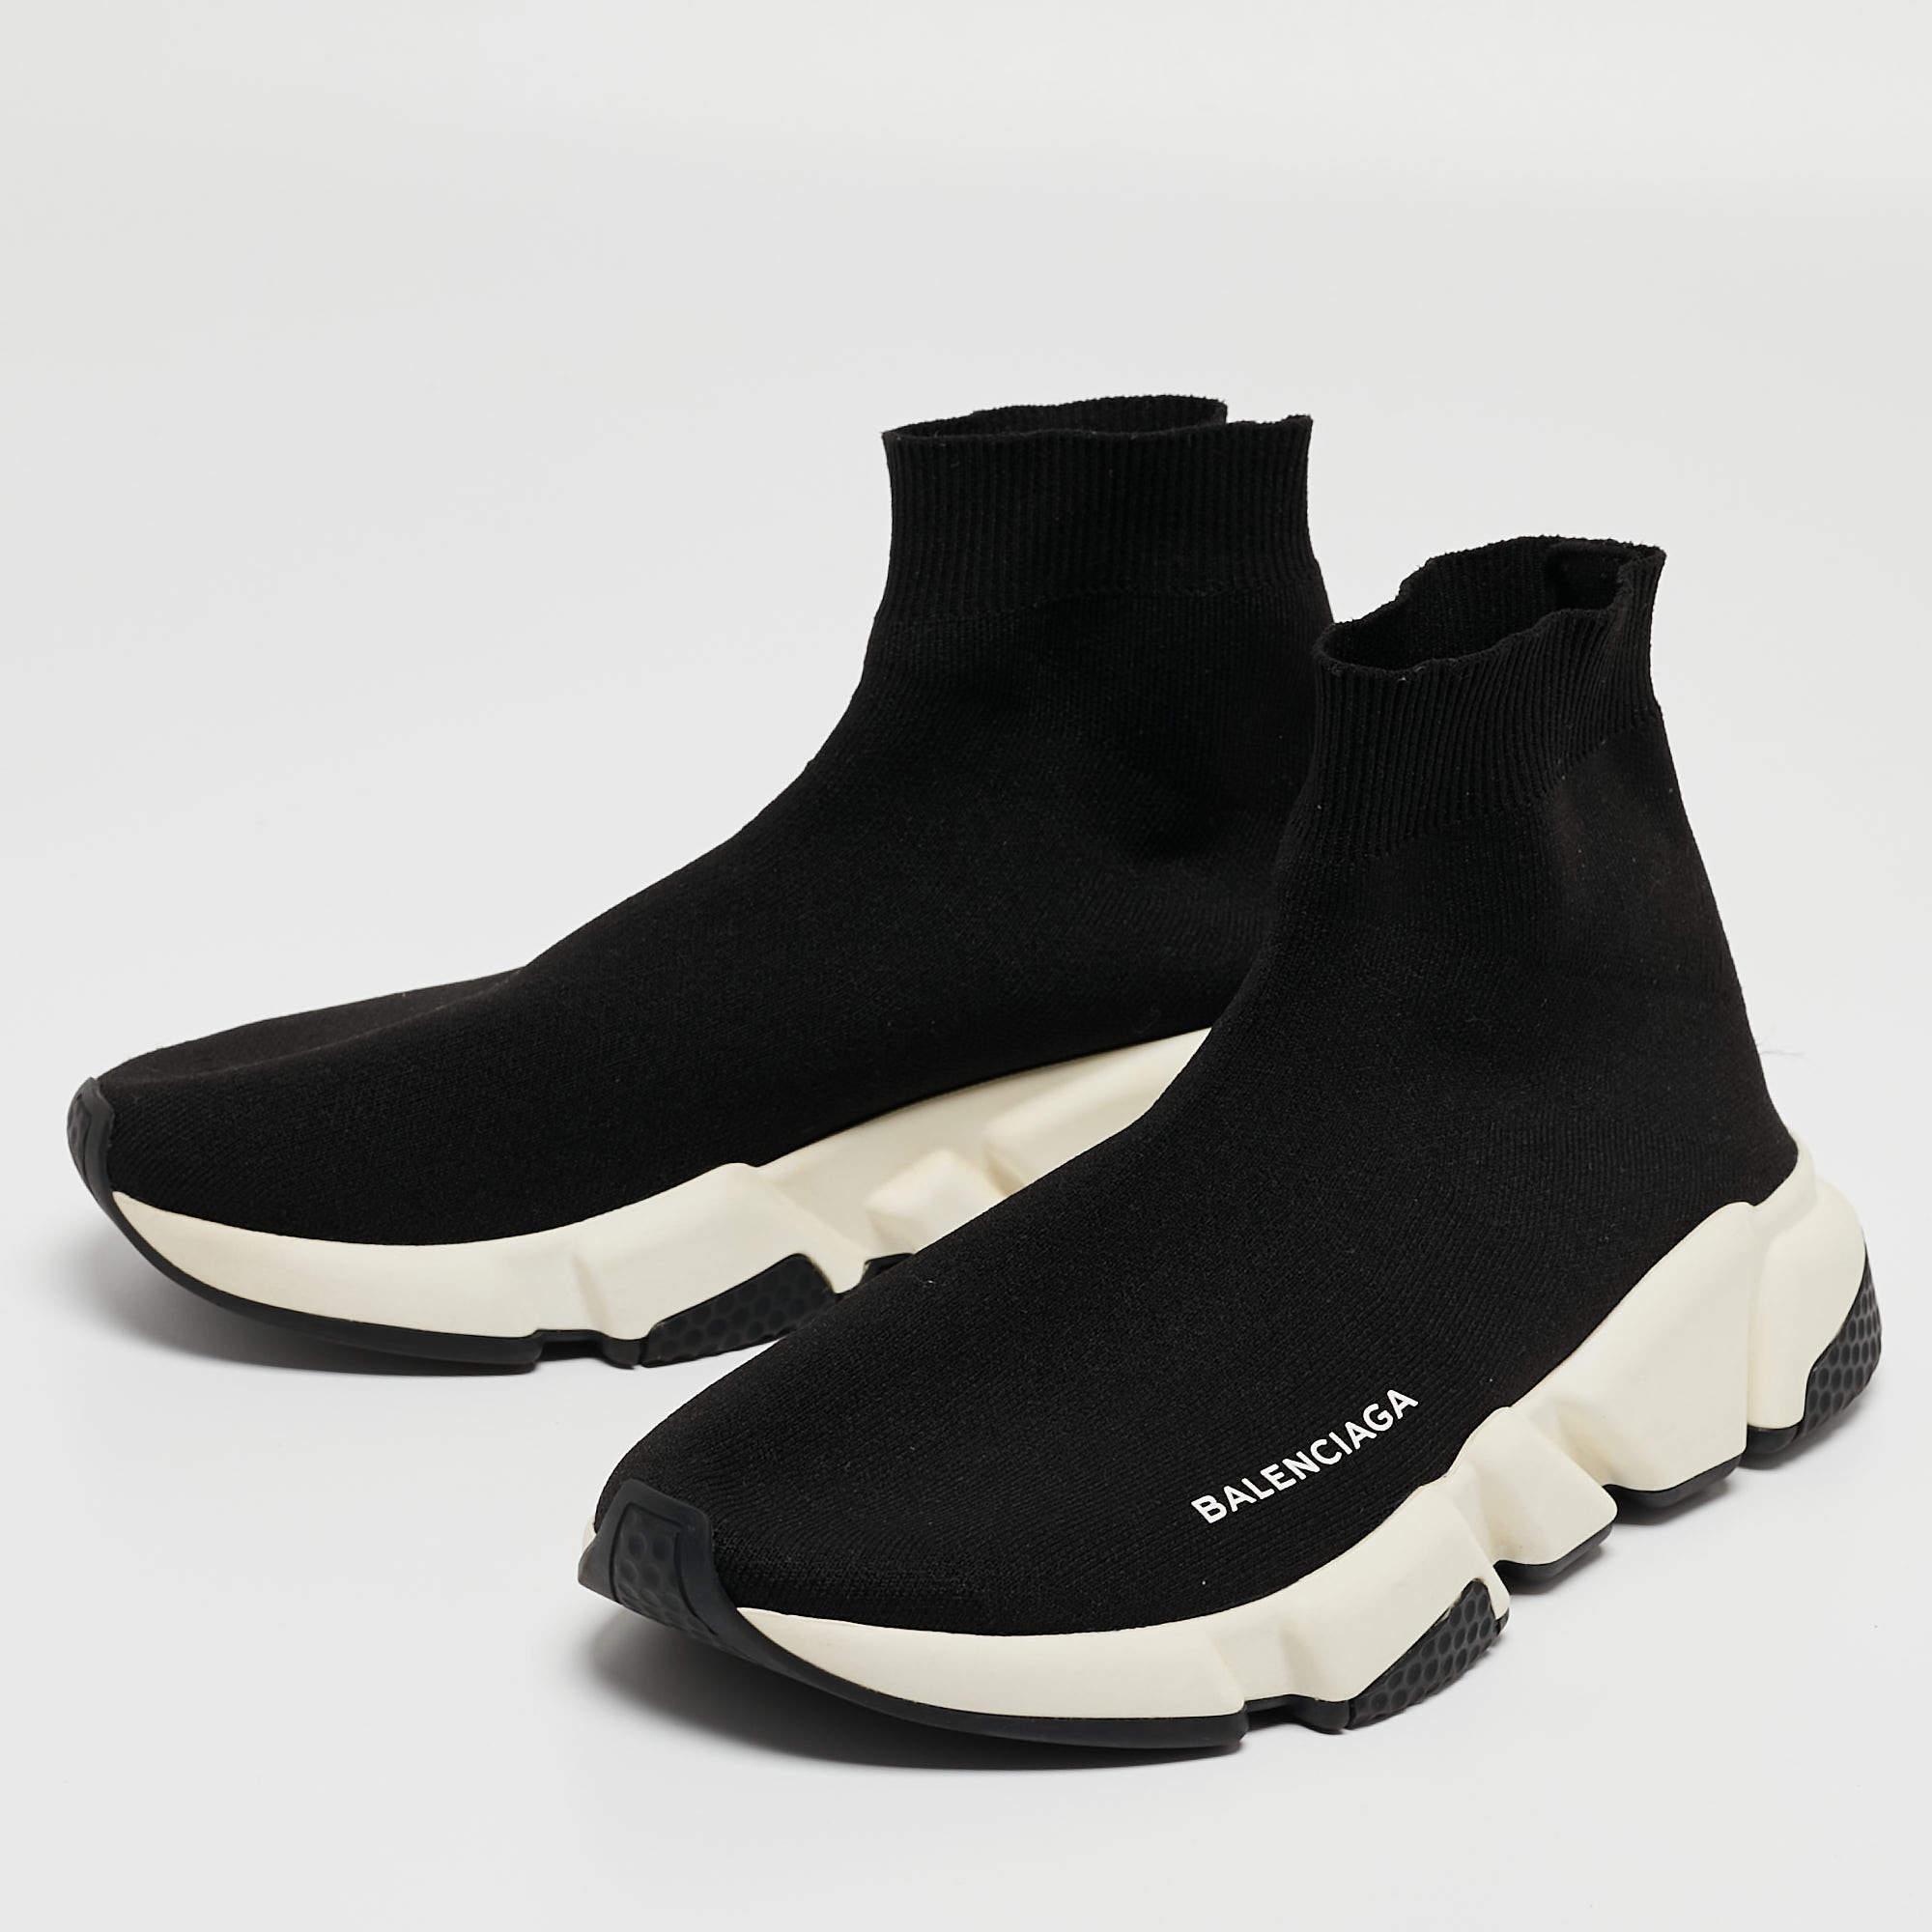 Upgrade your style with these Balenciaga sneakers. Meticulously designed for fashion and comfort, they're the ideal choice for a trendy and comfortable stride.

